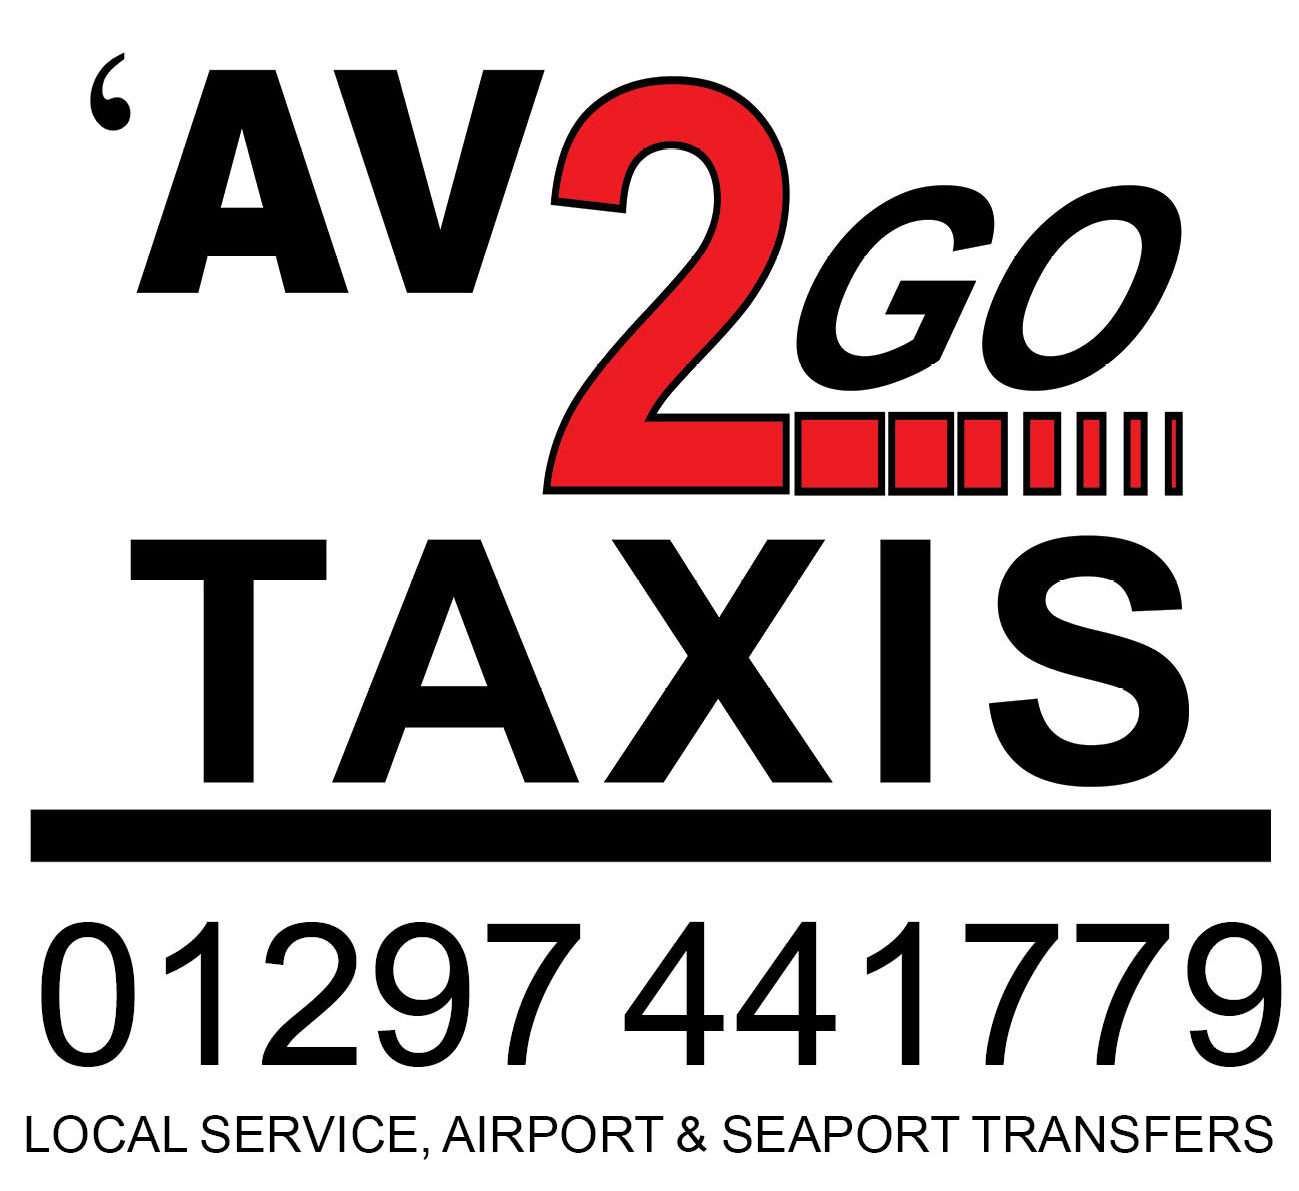 Local Axminster Taxis and Nationwide transport 24/7  – Axminster Taxi Services